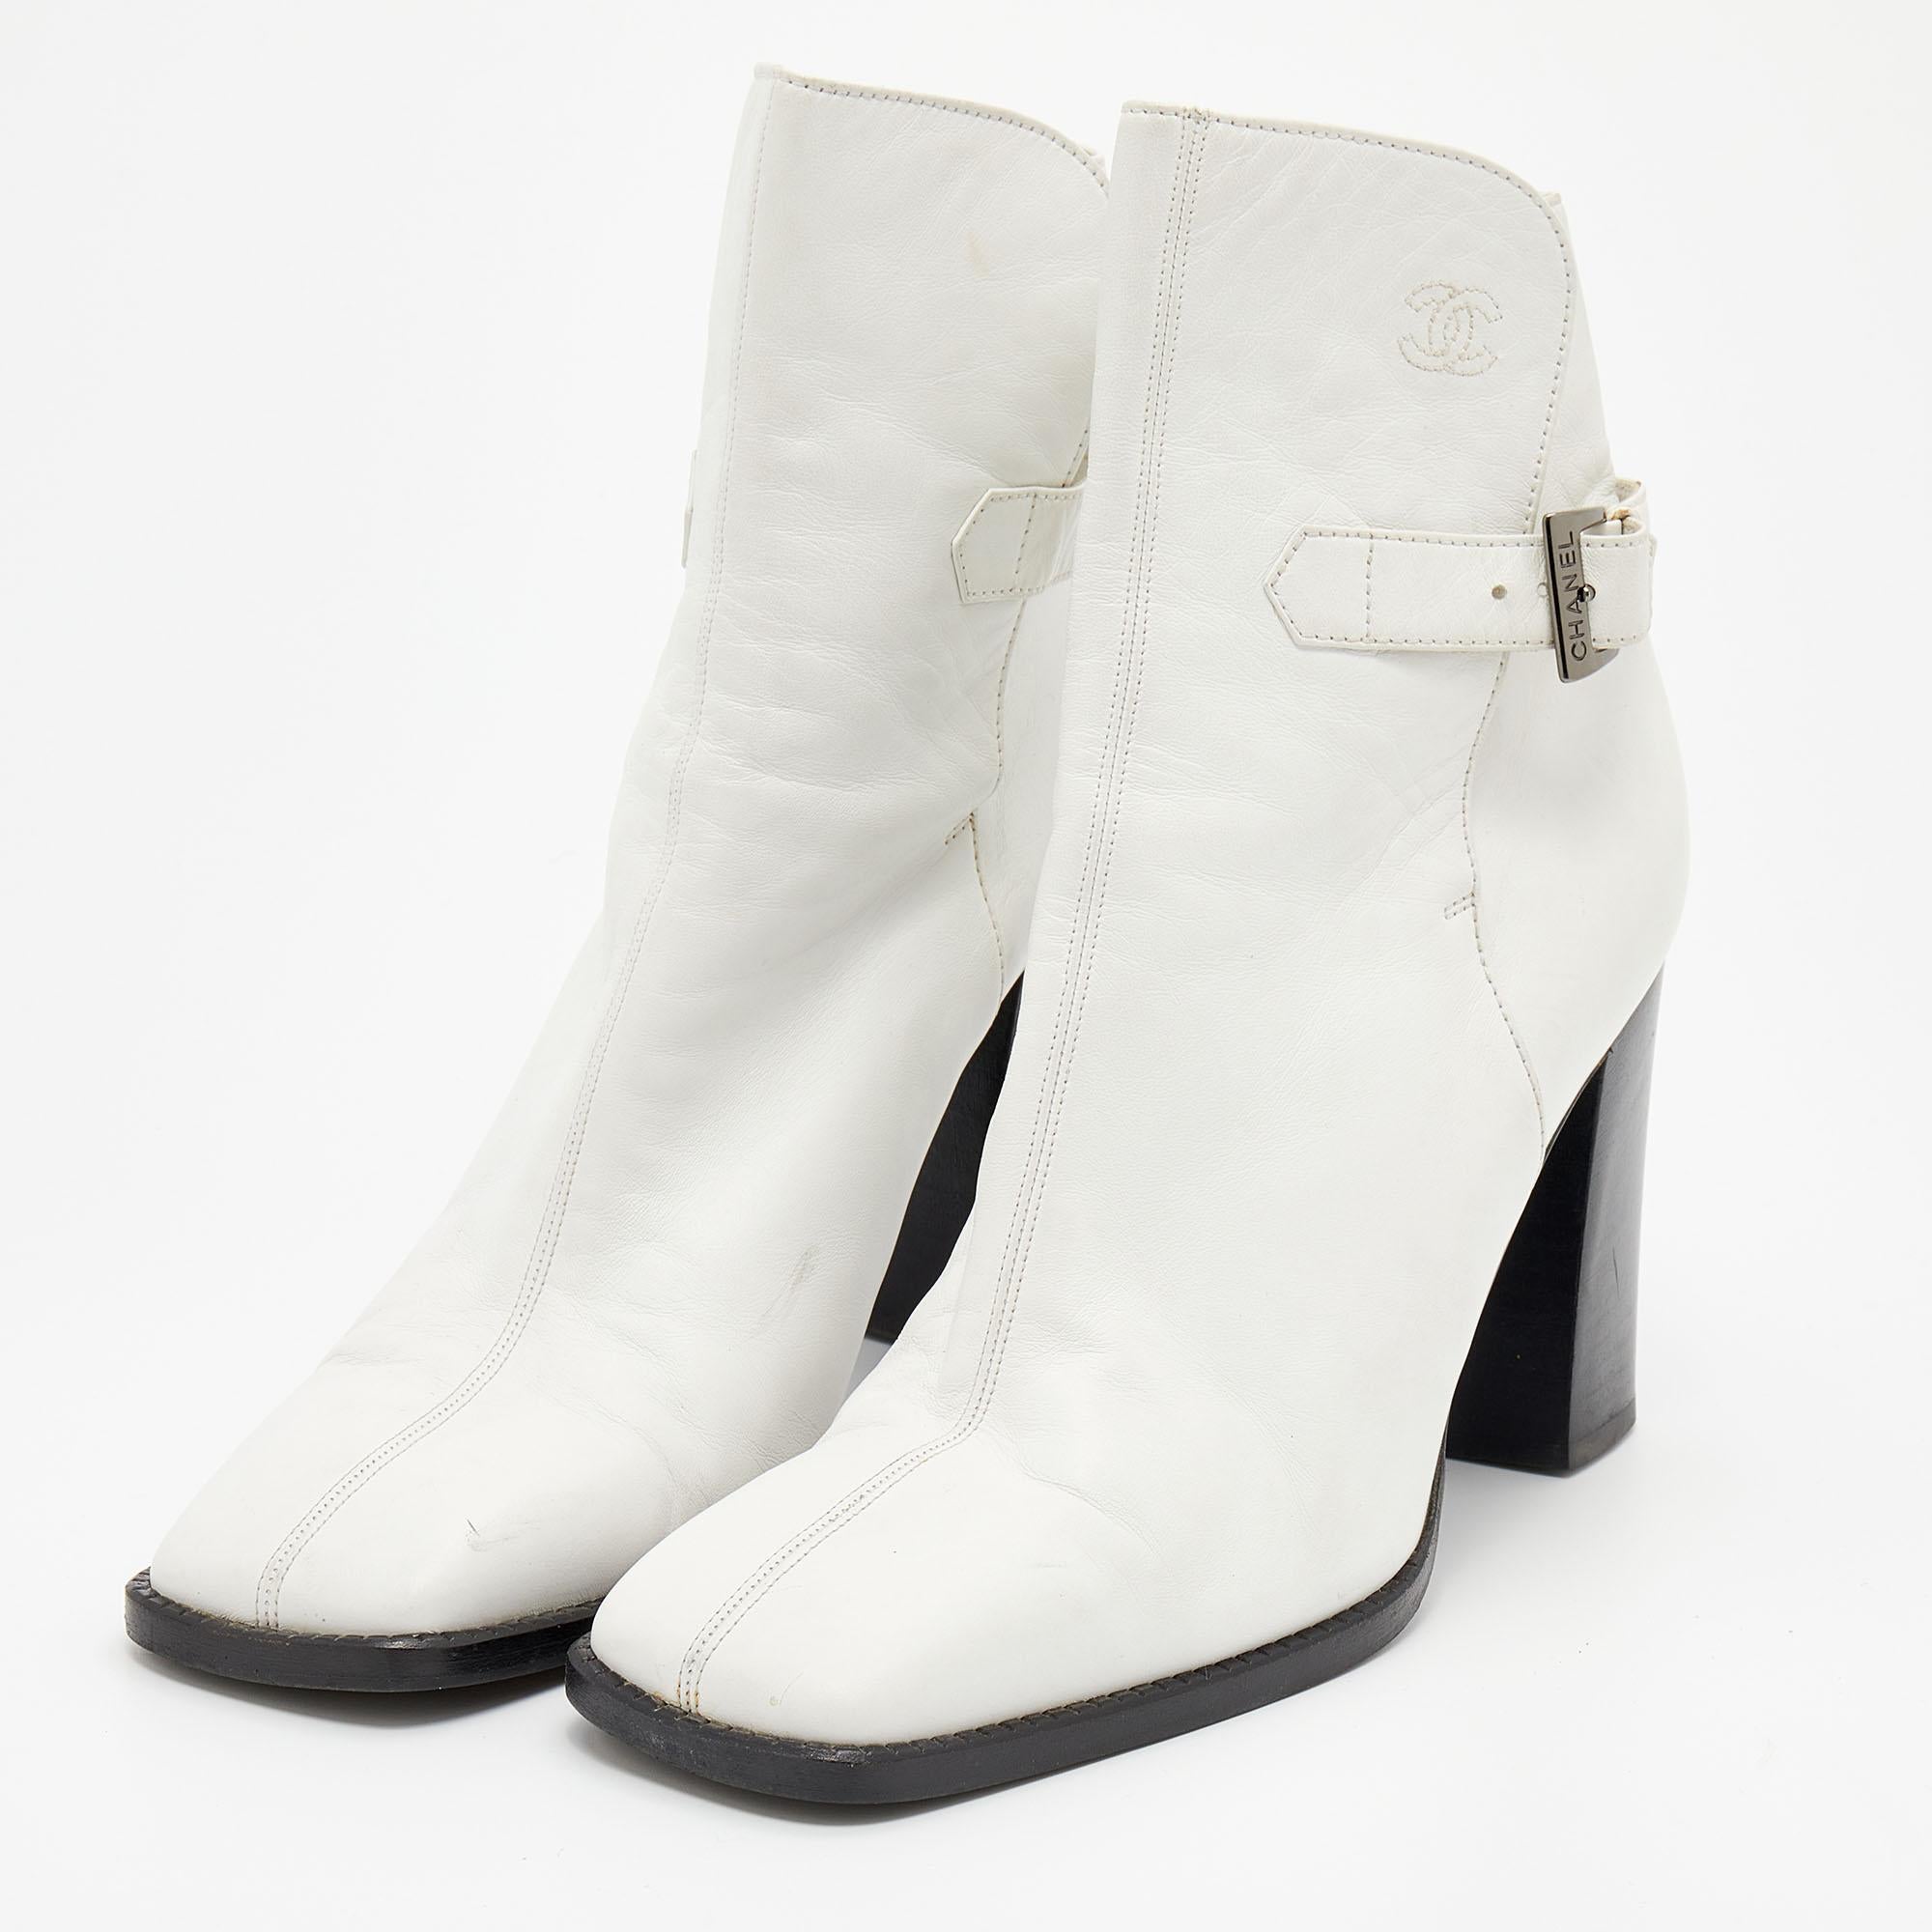 Chanel Vintage White Leather Square Toe Ankle Length Boots Size 39.5 1